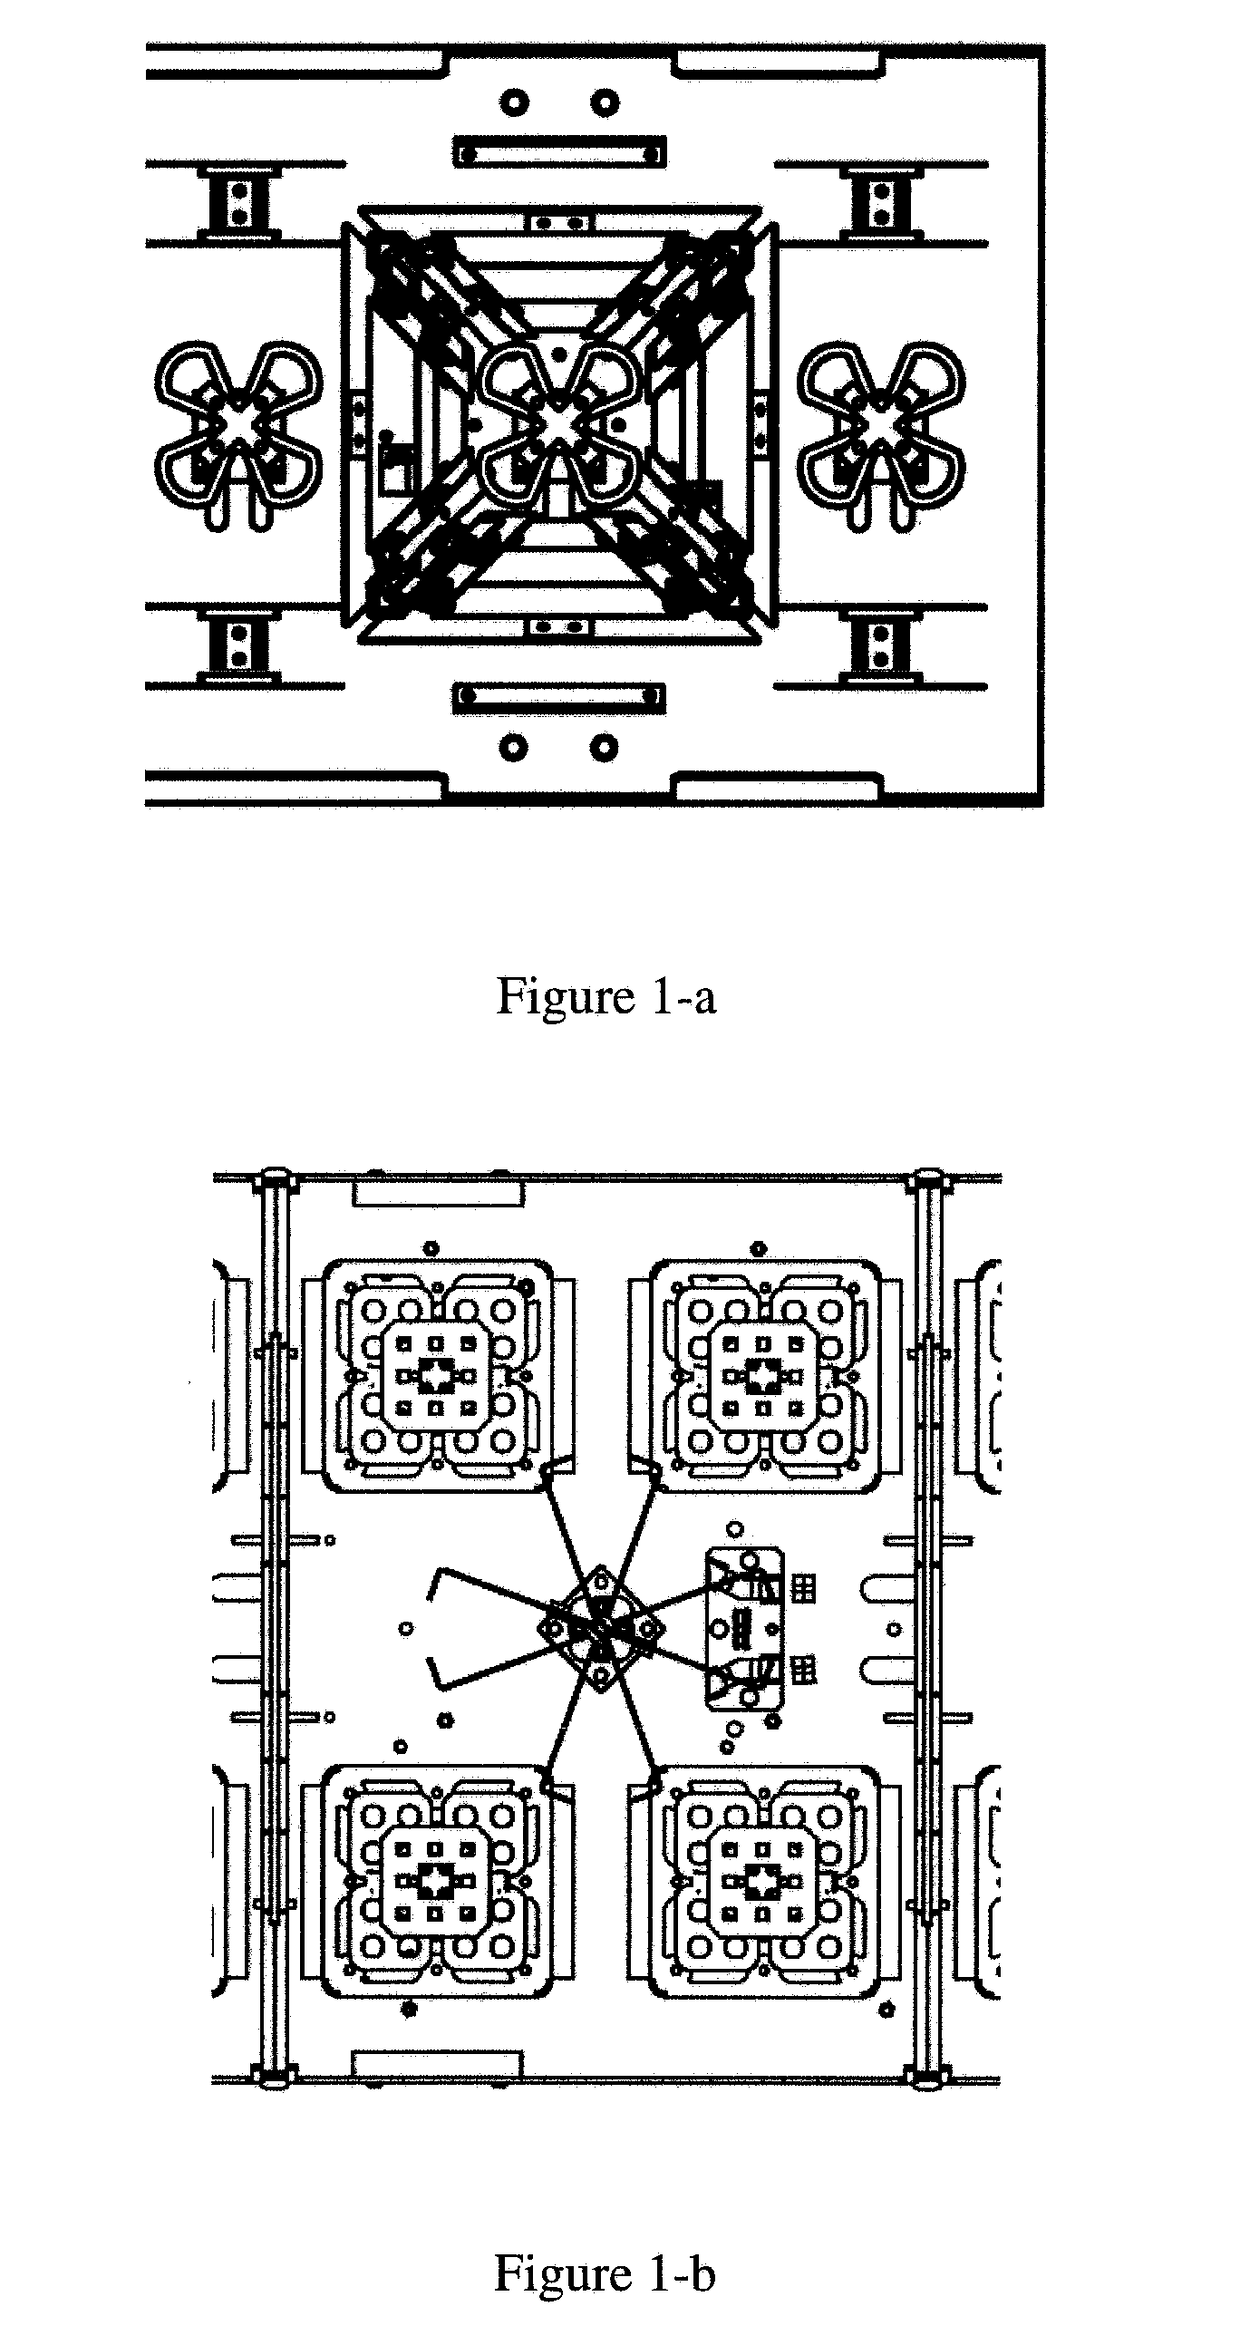 Low band dipole and multi-band multi-port antenna arrangement